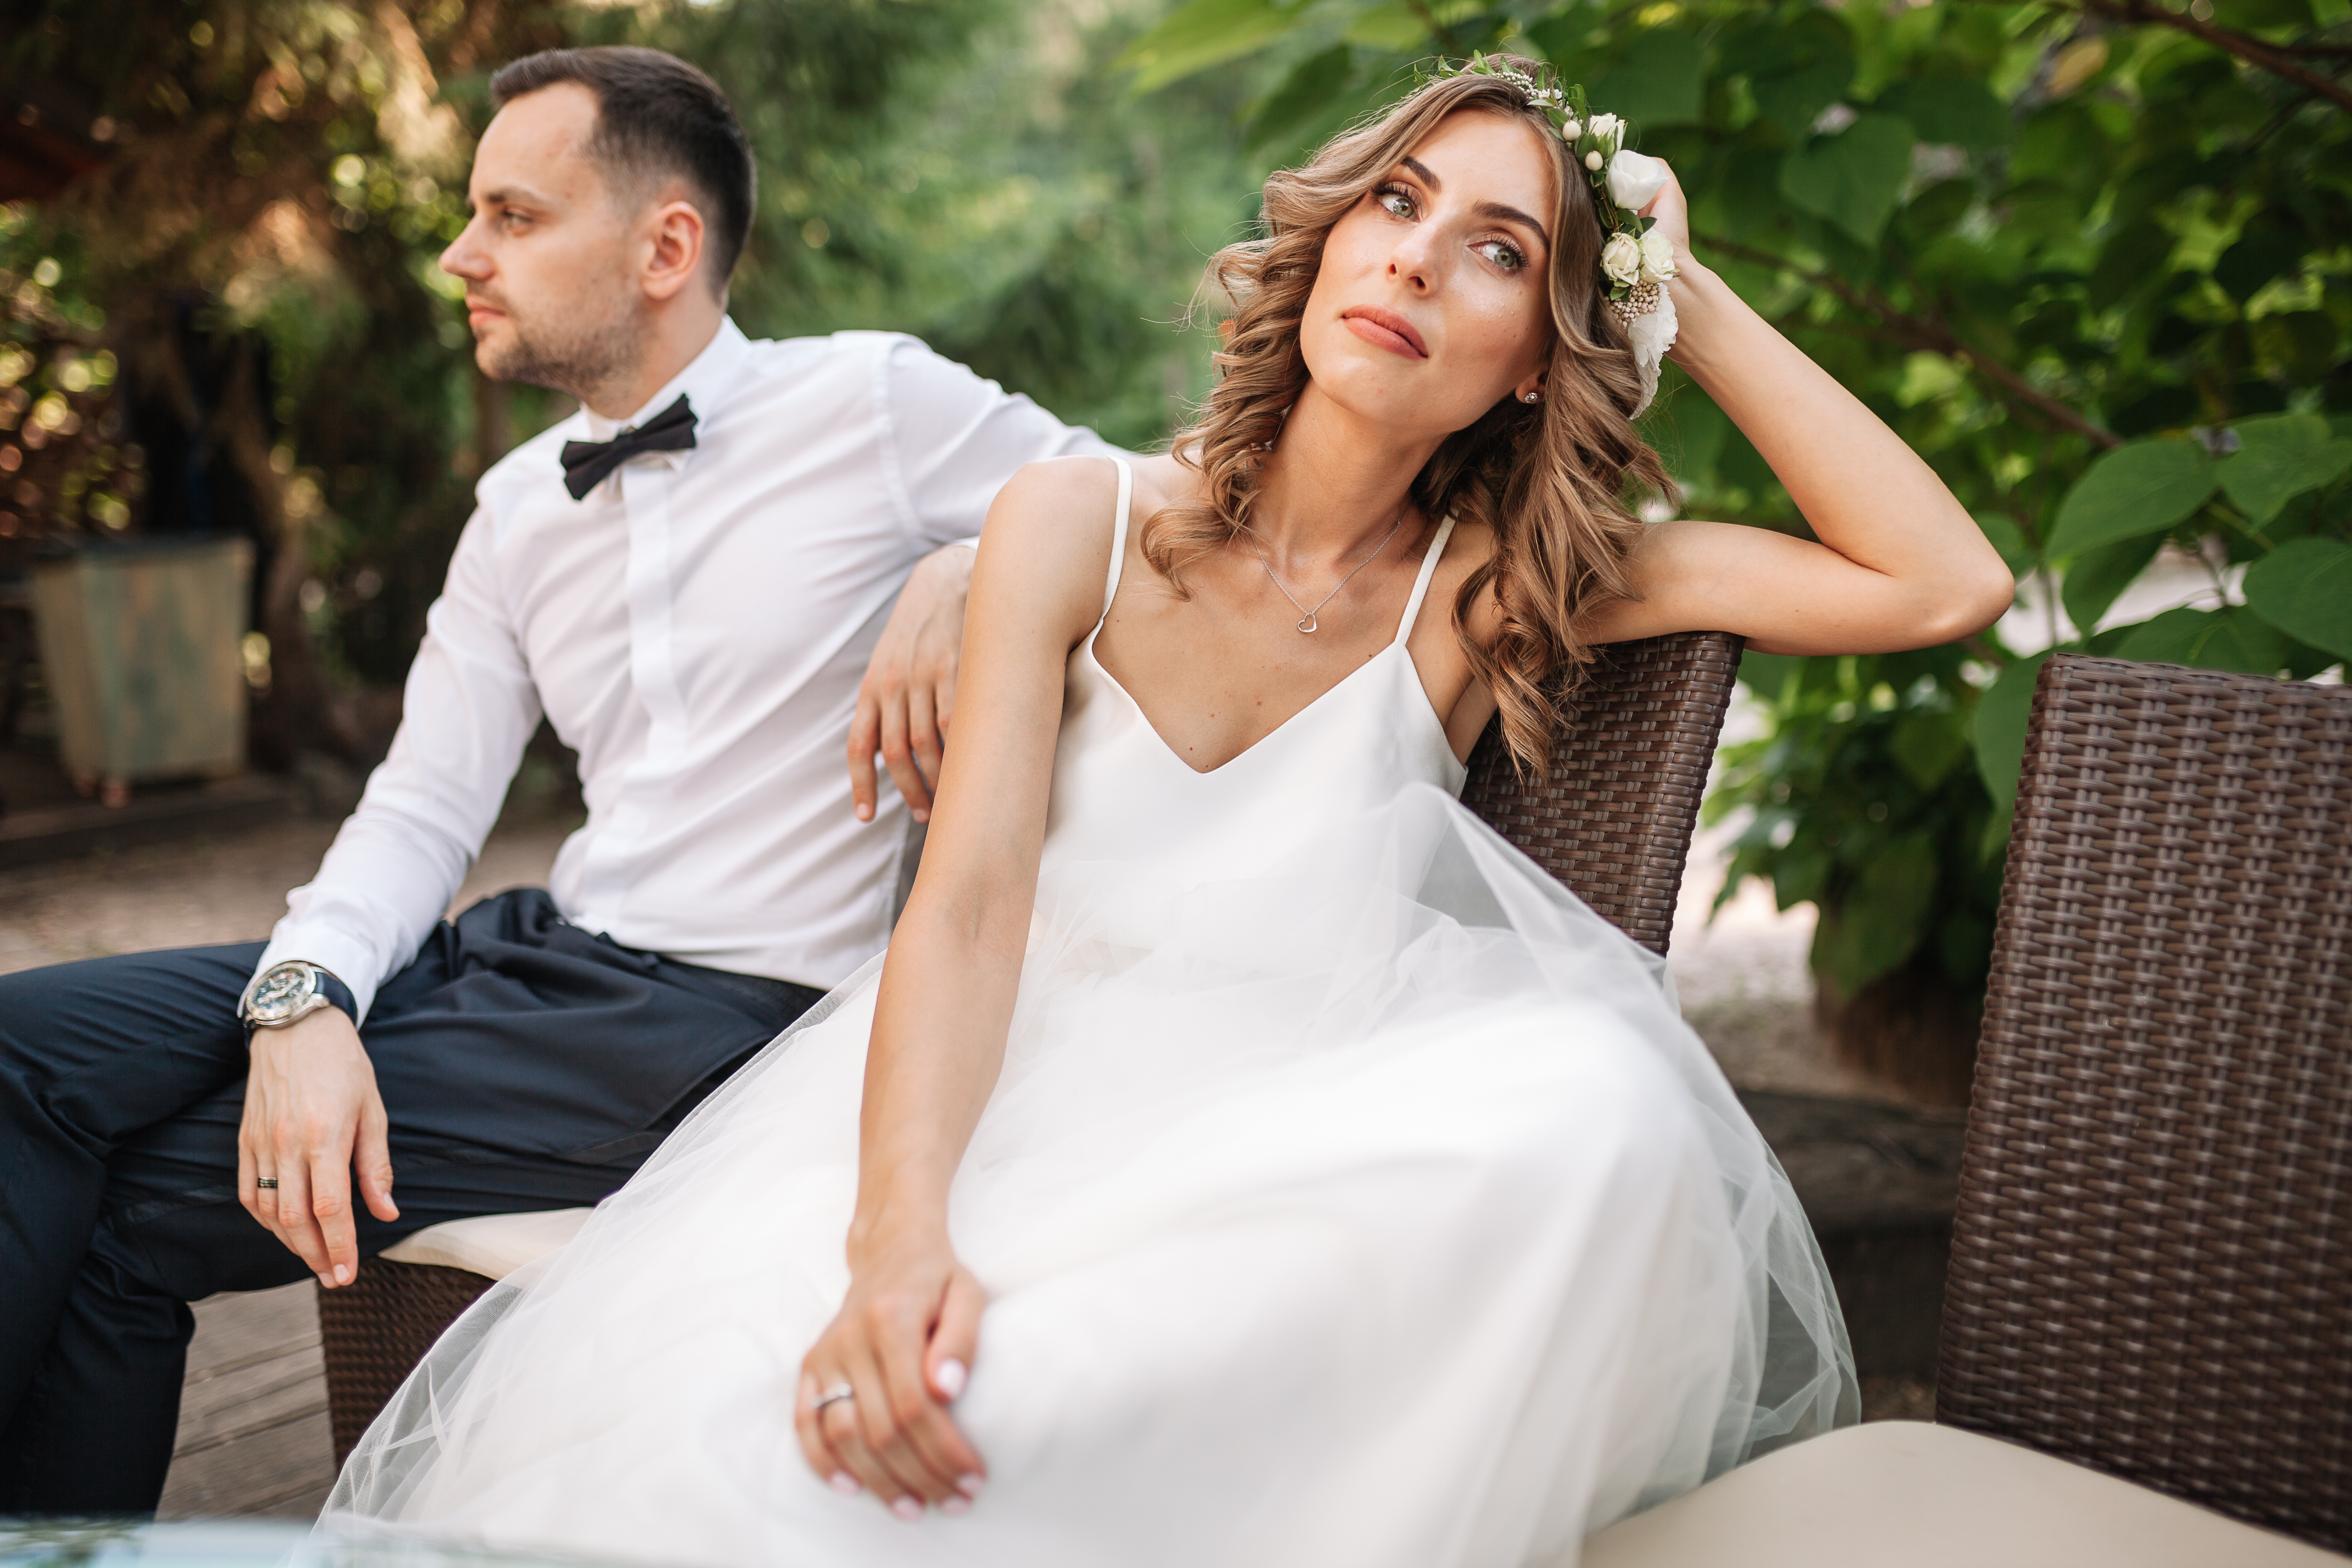 An upset couple sitting on chairs at their wedding | Source: Shutterstock